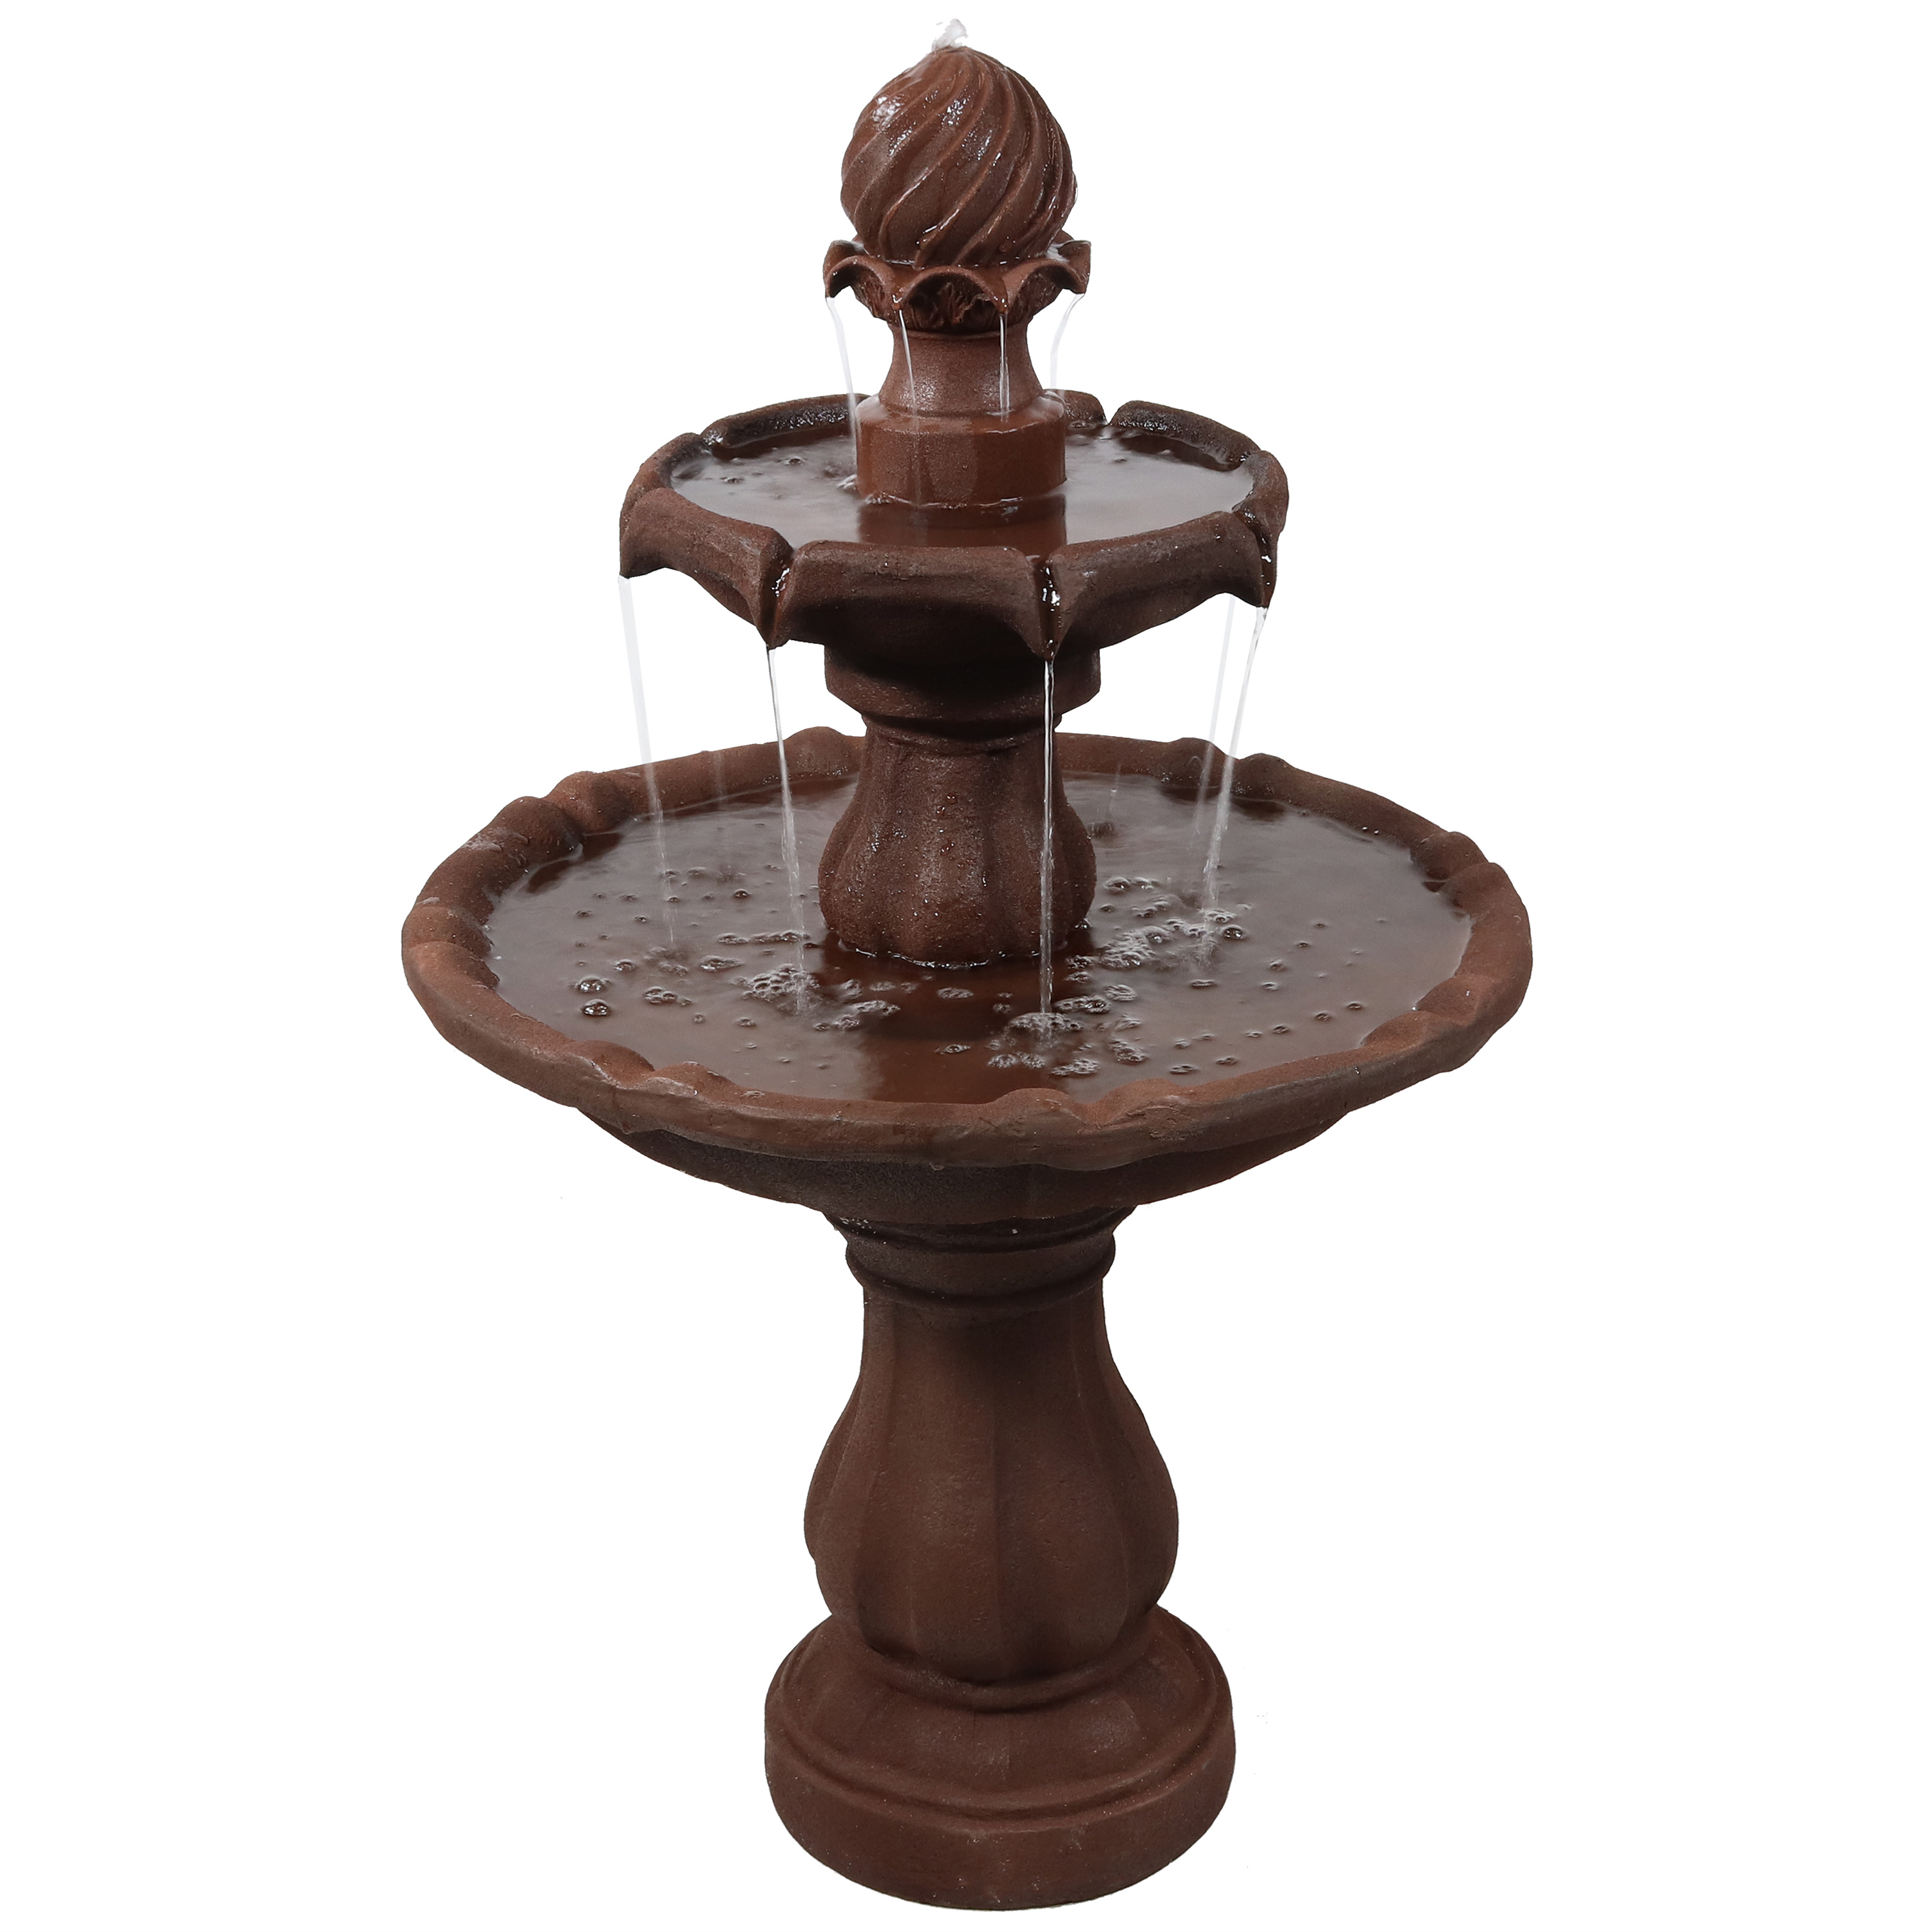 Sunnydaze Two Tier Solar Outdoor Water Fountain with Battery Backup, Rust Finish, 35 Inch Tall, No